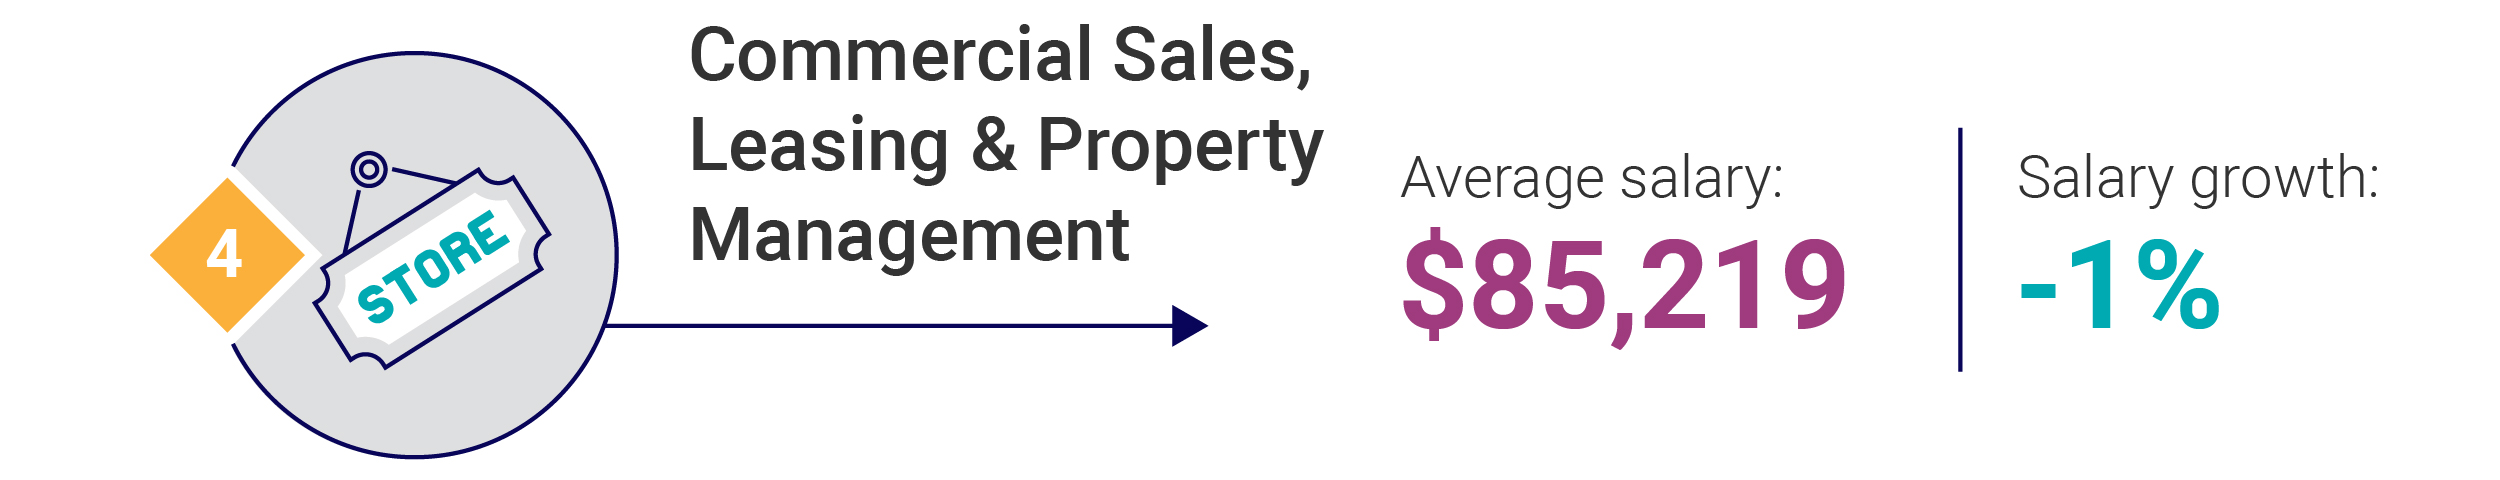 Commercial Sales, Leasing & Property Mgmt